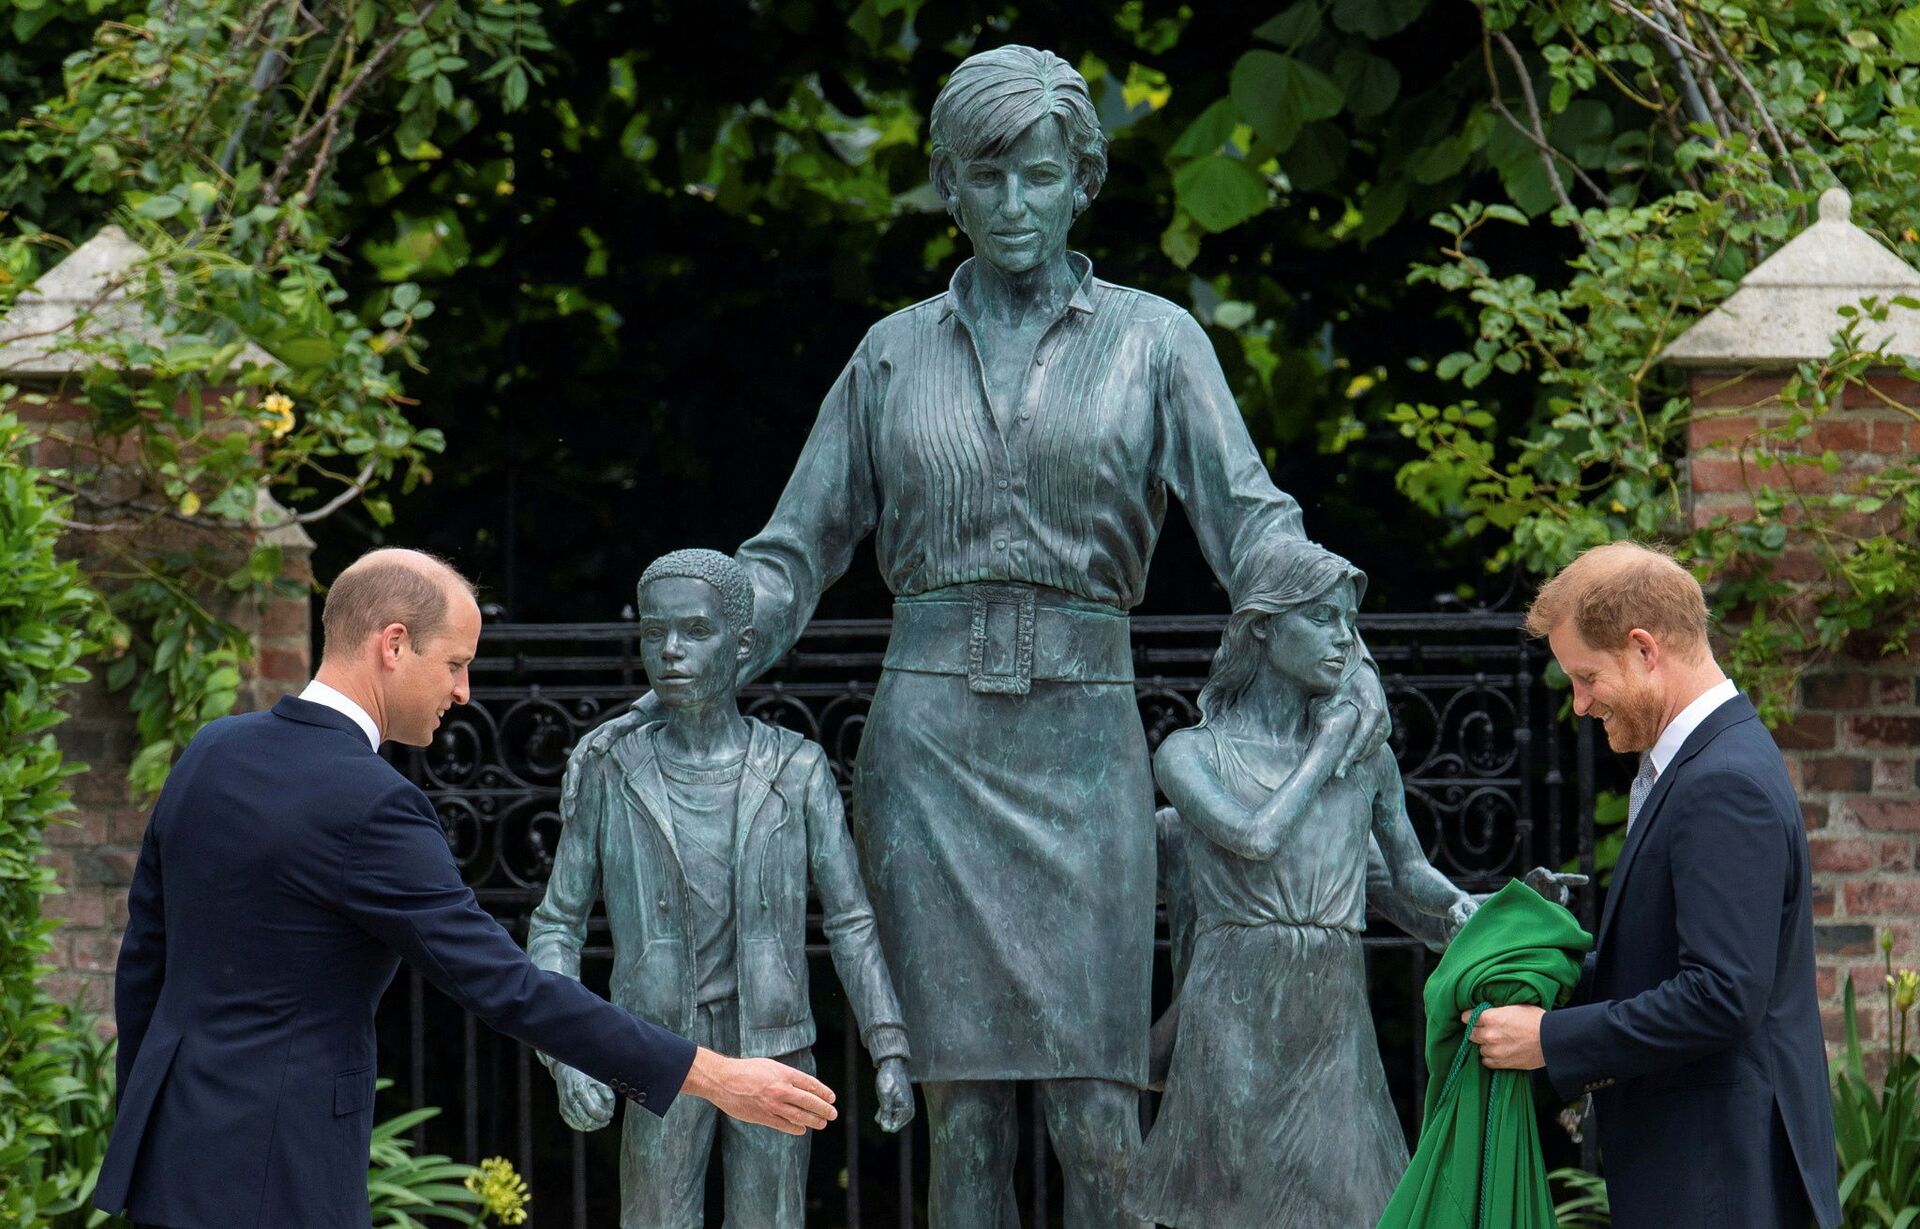 Britain's Prince William, The Duke of Cambridge, and Prince Harry, Duke of Sussex, react during the unveiling of a statue they commissioned of their mother Diana, Princess of Wales, in the Sunken Garden at Kensington Palace, London, Britain July 1, 2021 - Sputnik International, 1920, 07.09.2021